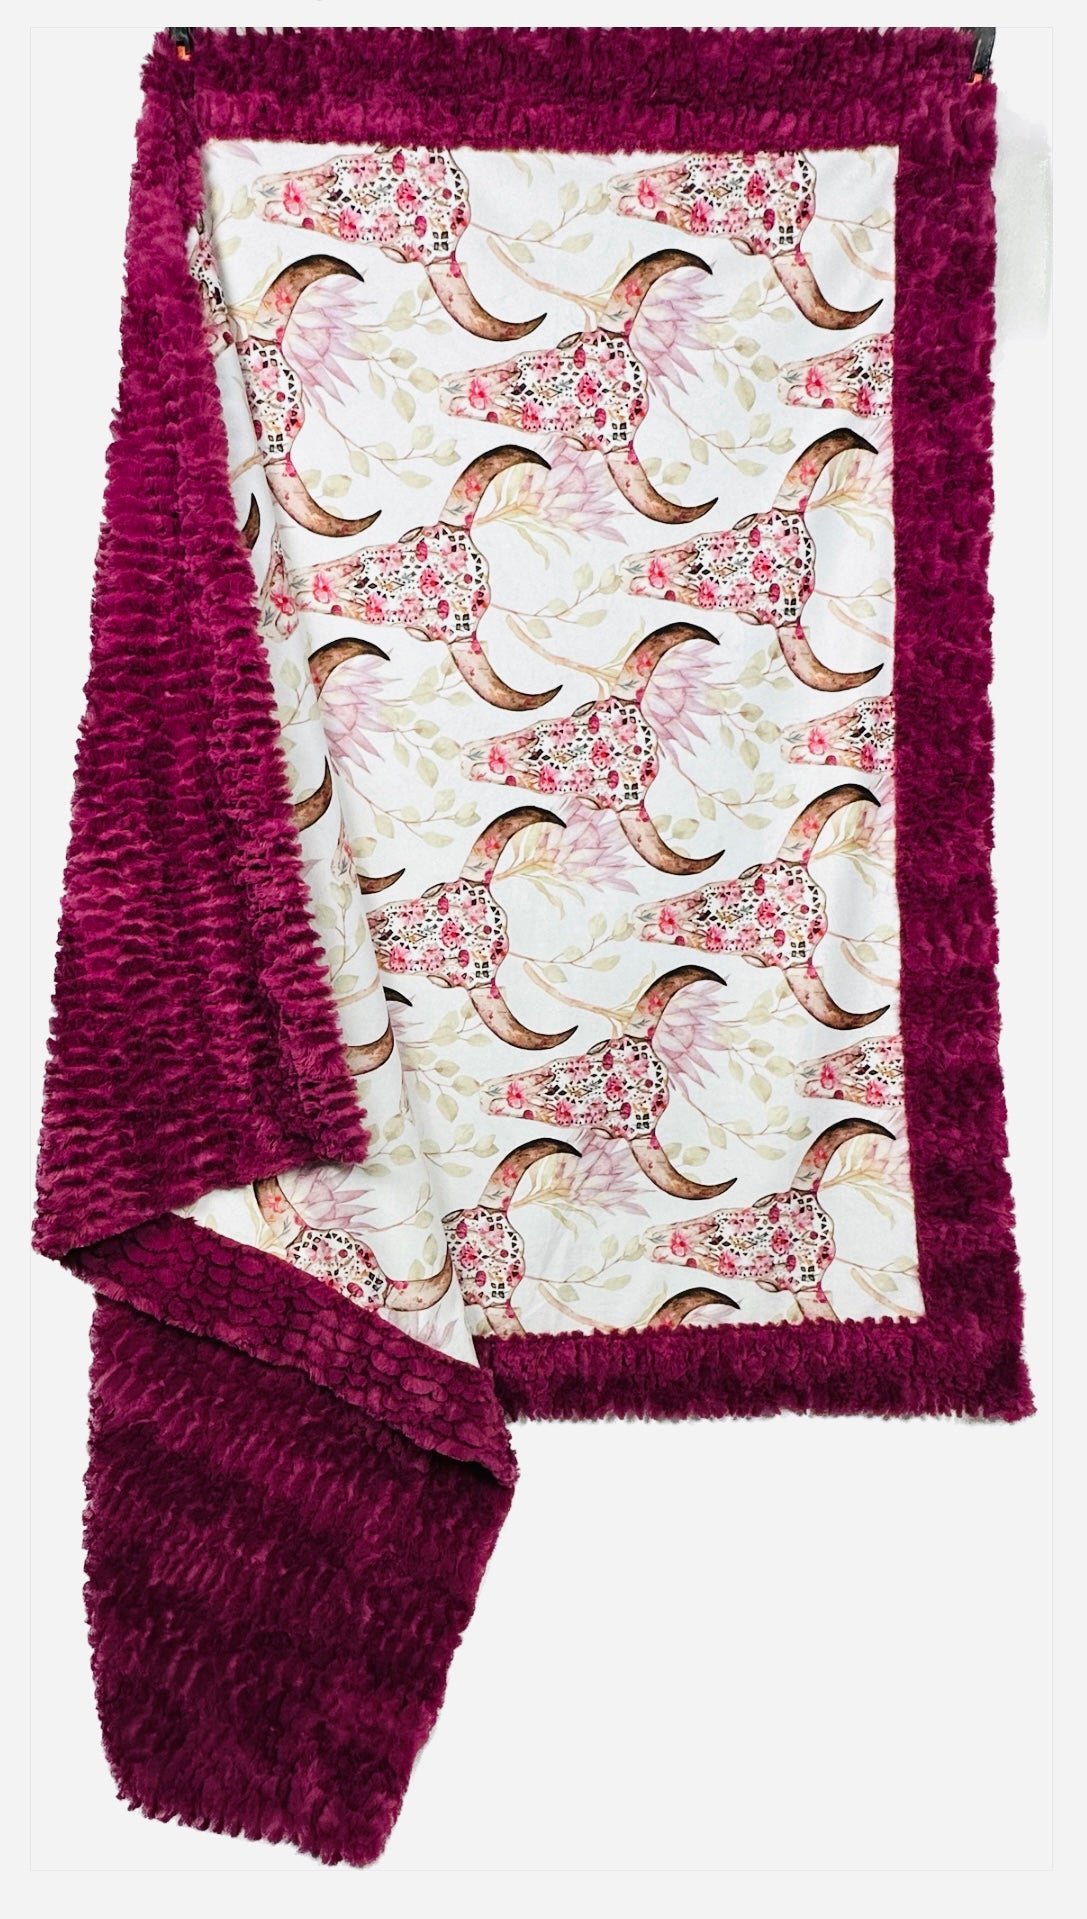 Floral Skull on Florence Claret Luxe Large Adult Blanket - Artistic and Symbolic Luxury - 55x76